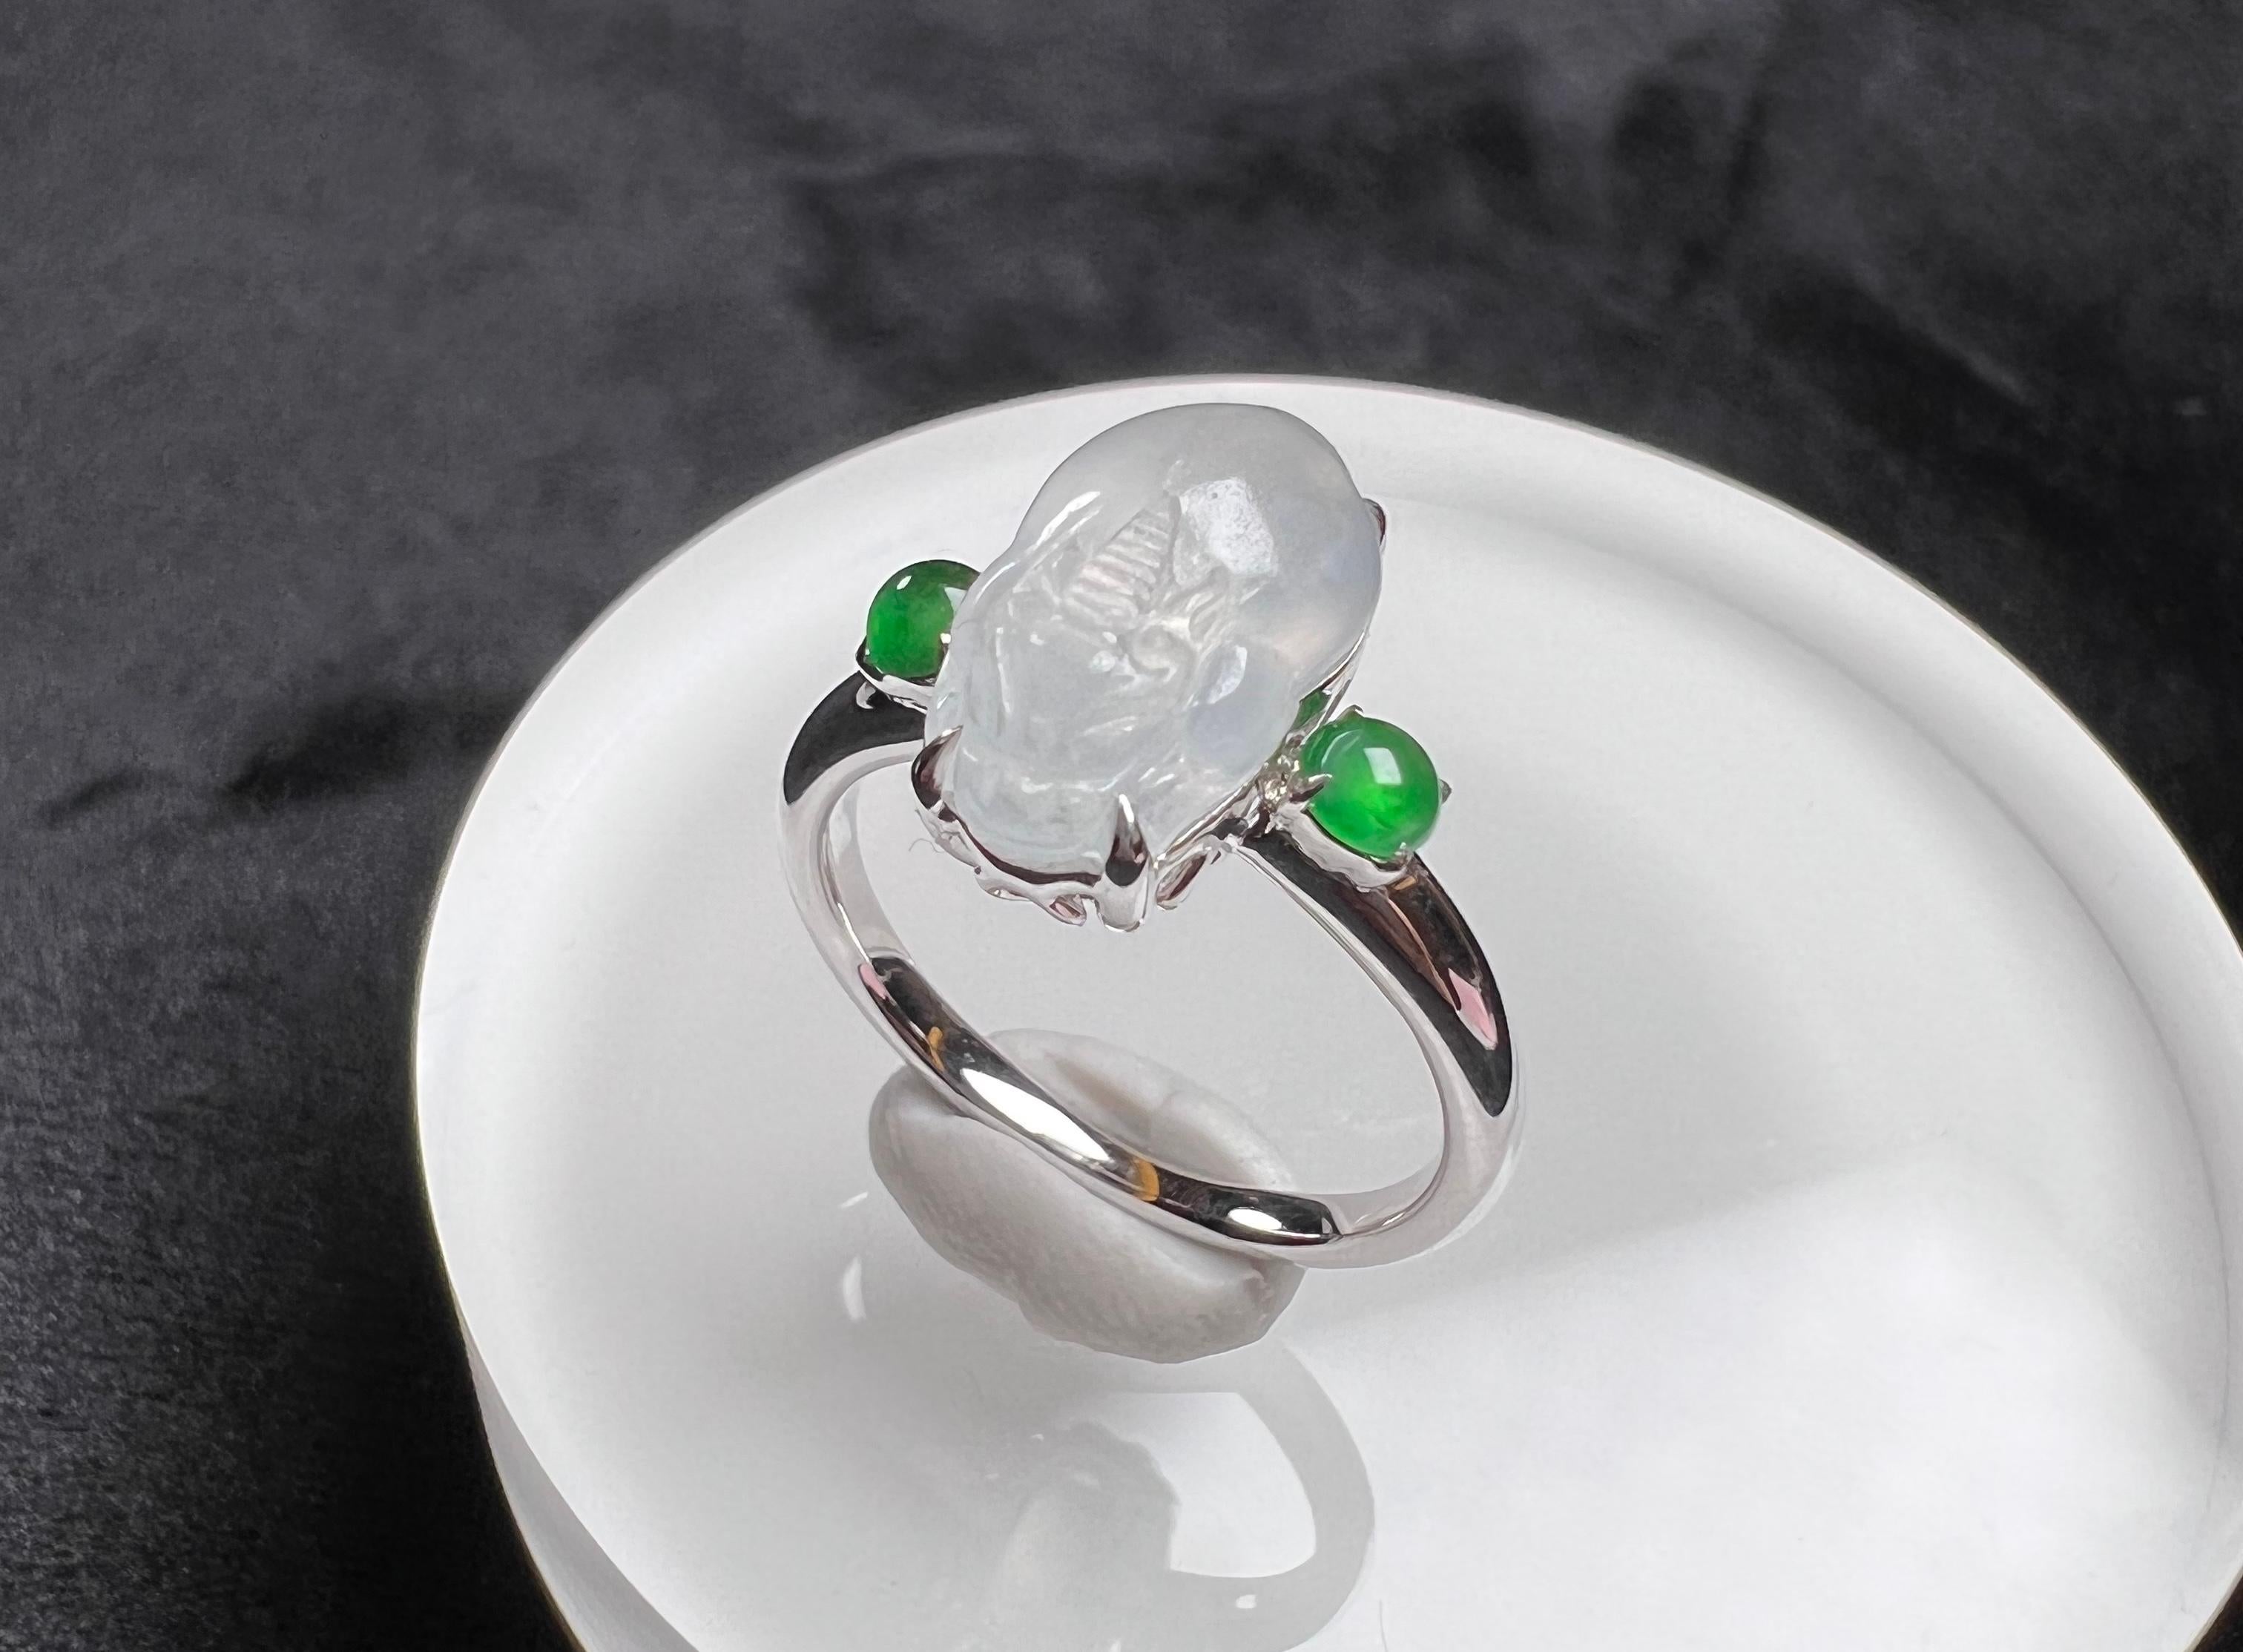 18K White Gold Icy Jadeite Green Jadeite Mythical Creature Ring, Cocktail Ring

Total weight (approx.): 3.8g 
Icy jadeite measurement (approx.): 12.9*7.6mm
Green jadeite measurement (approx.): 3.2*3.2mm

This ring is resizable.
Get in touch with us